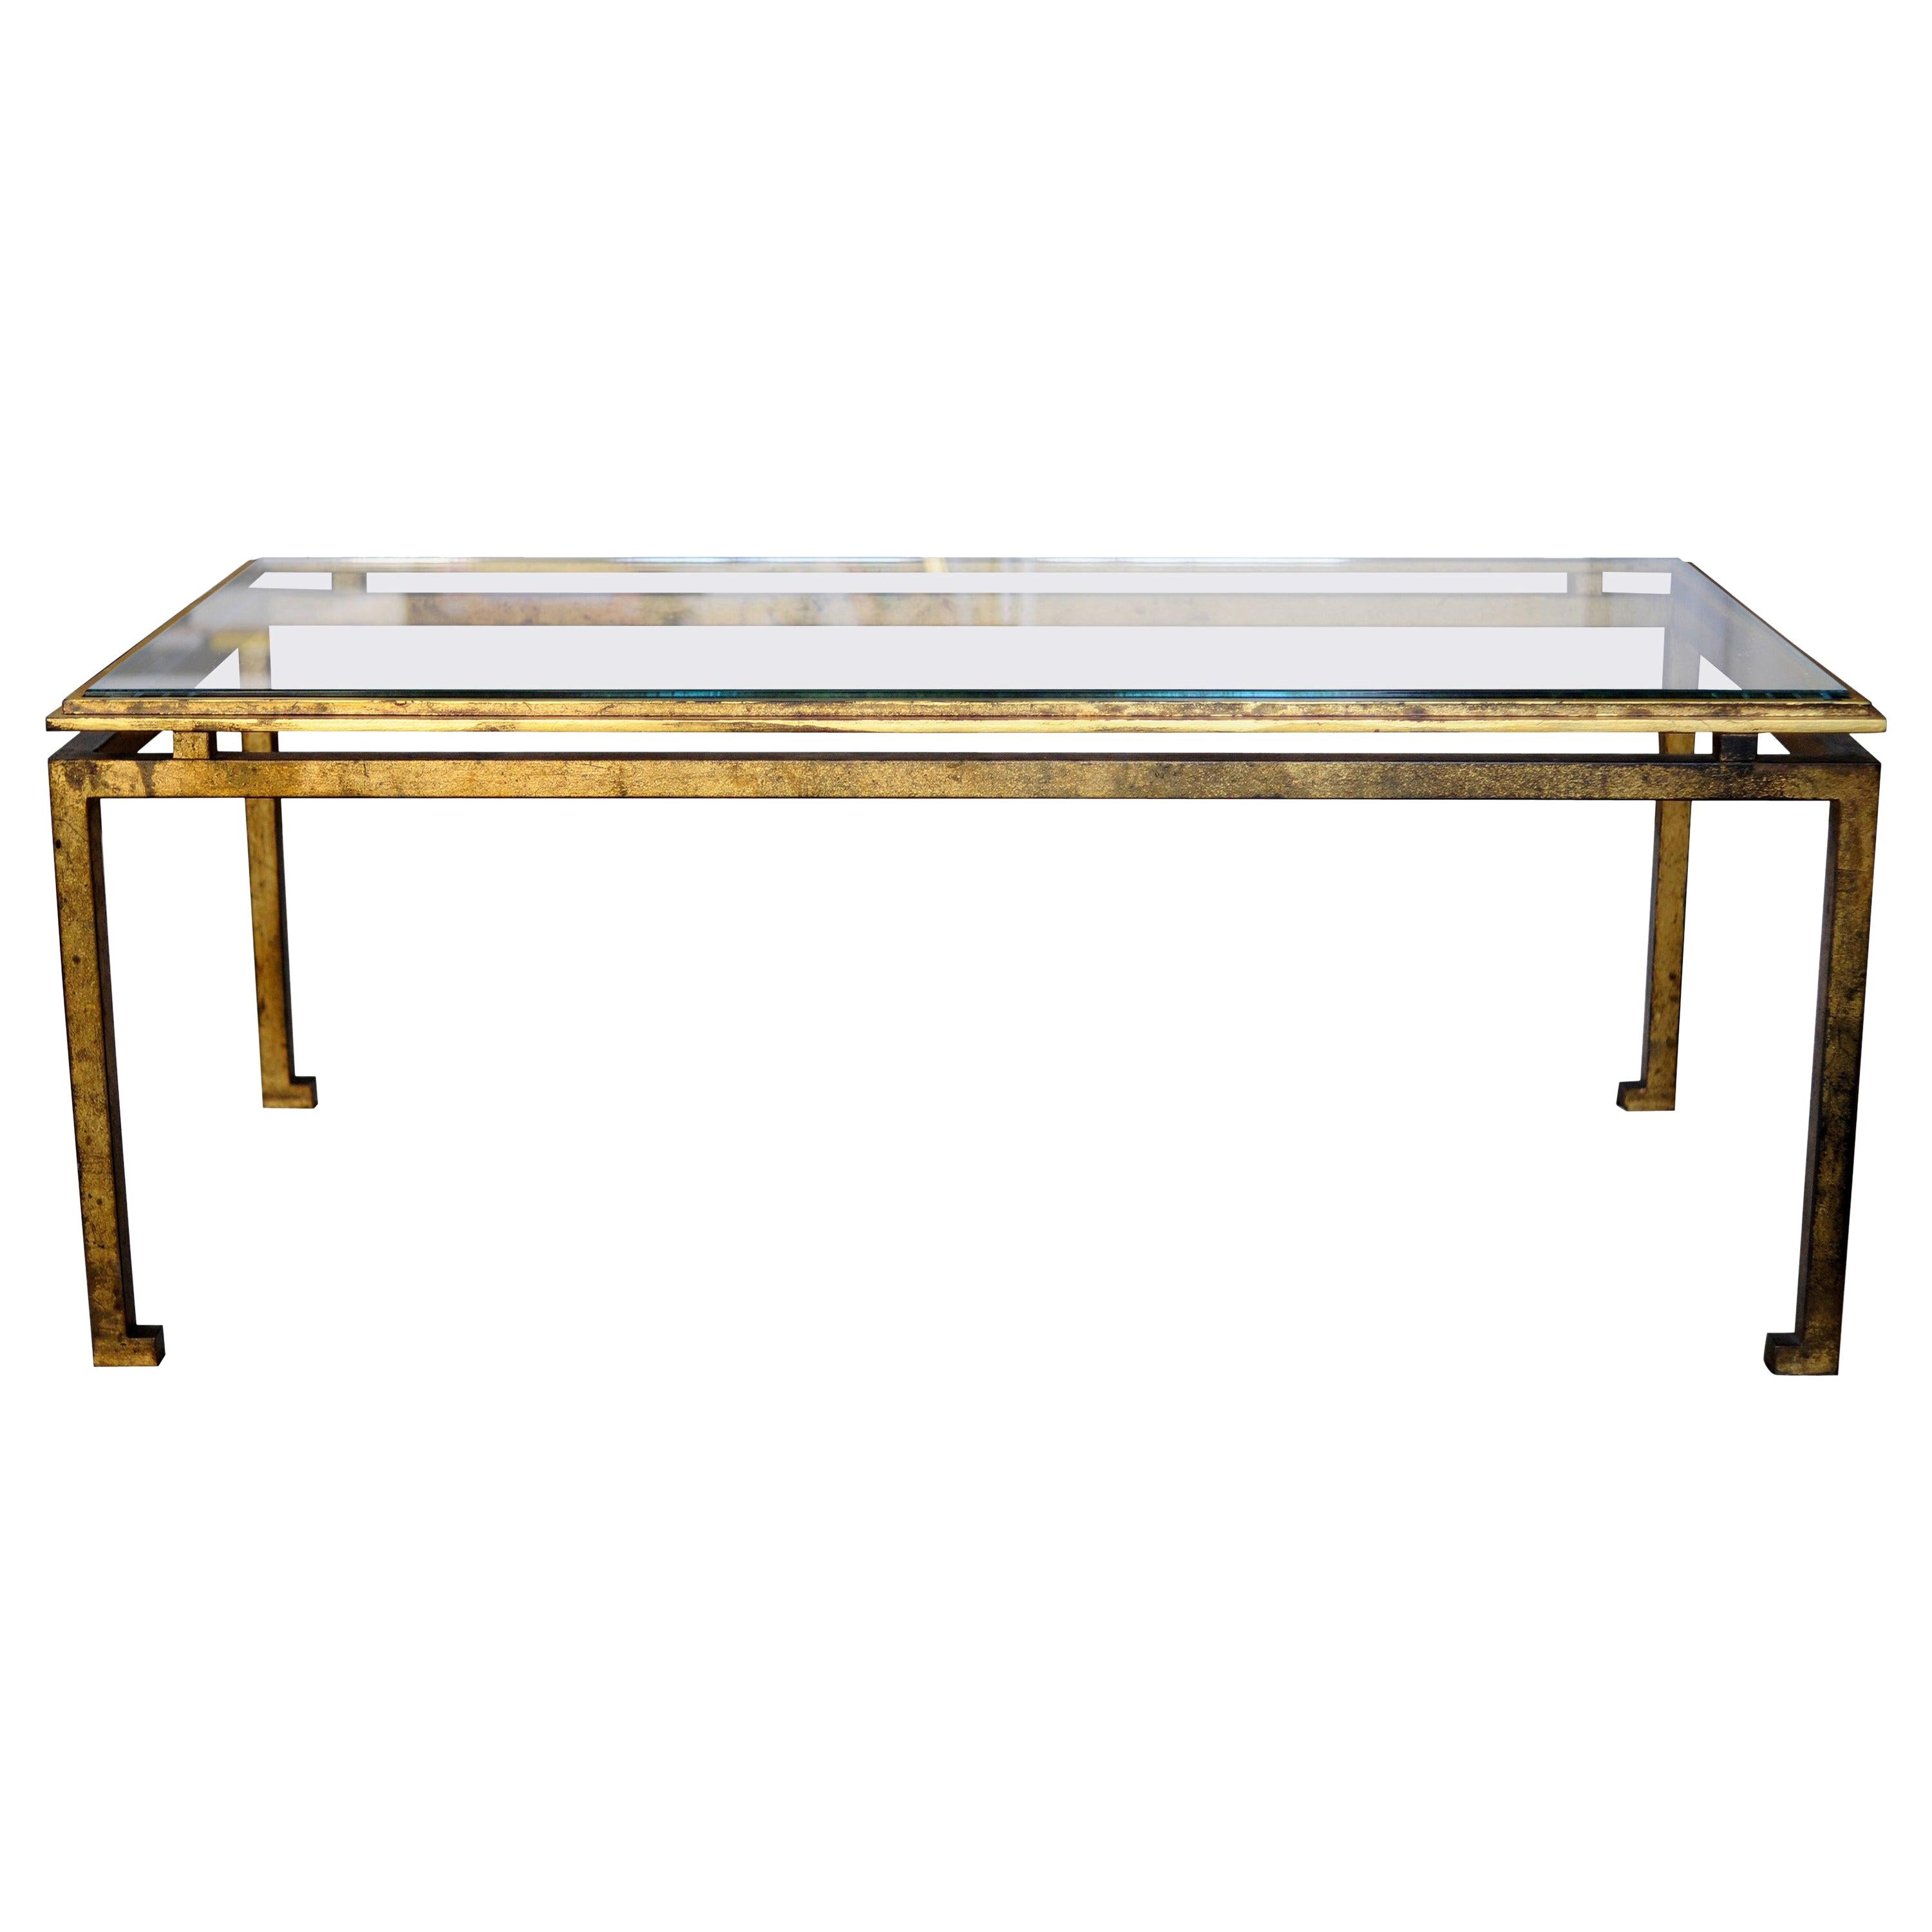 French Mid-Century Modern Neoclassical, Gilt Iron Coffee Table by Maison Ramsay